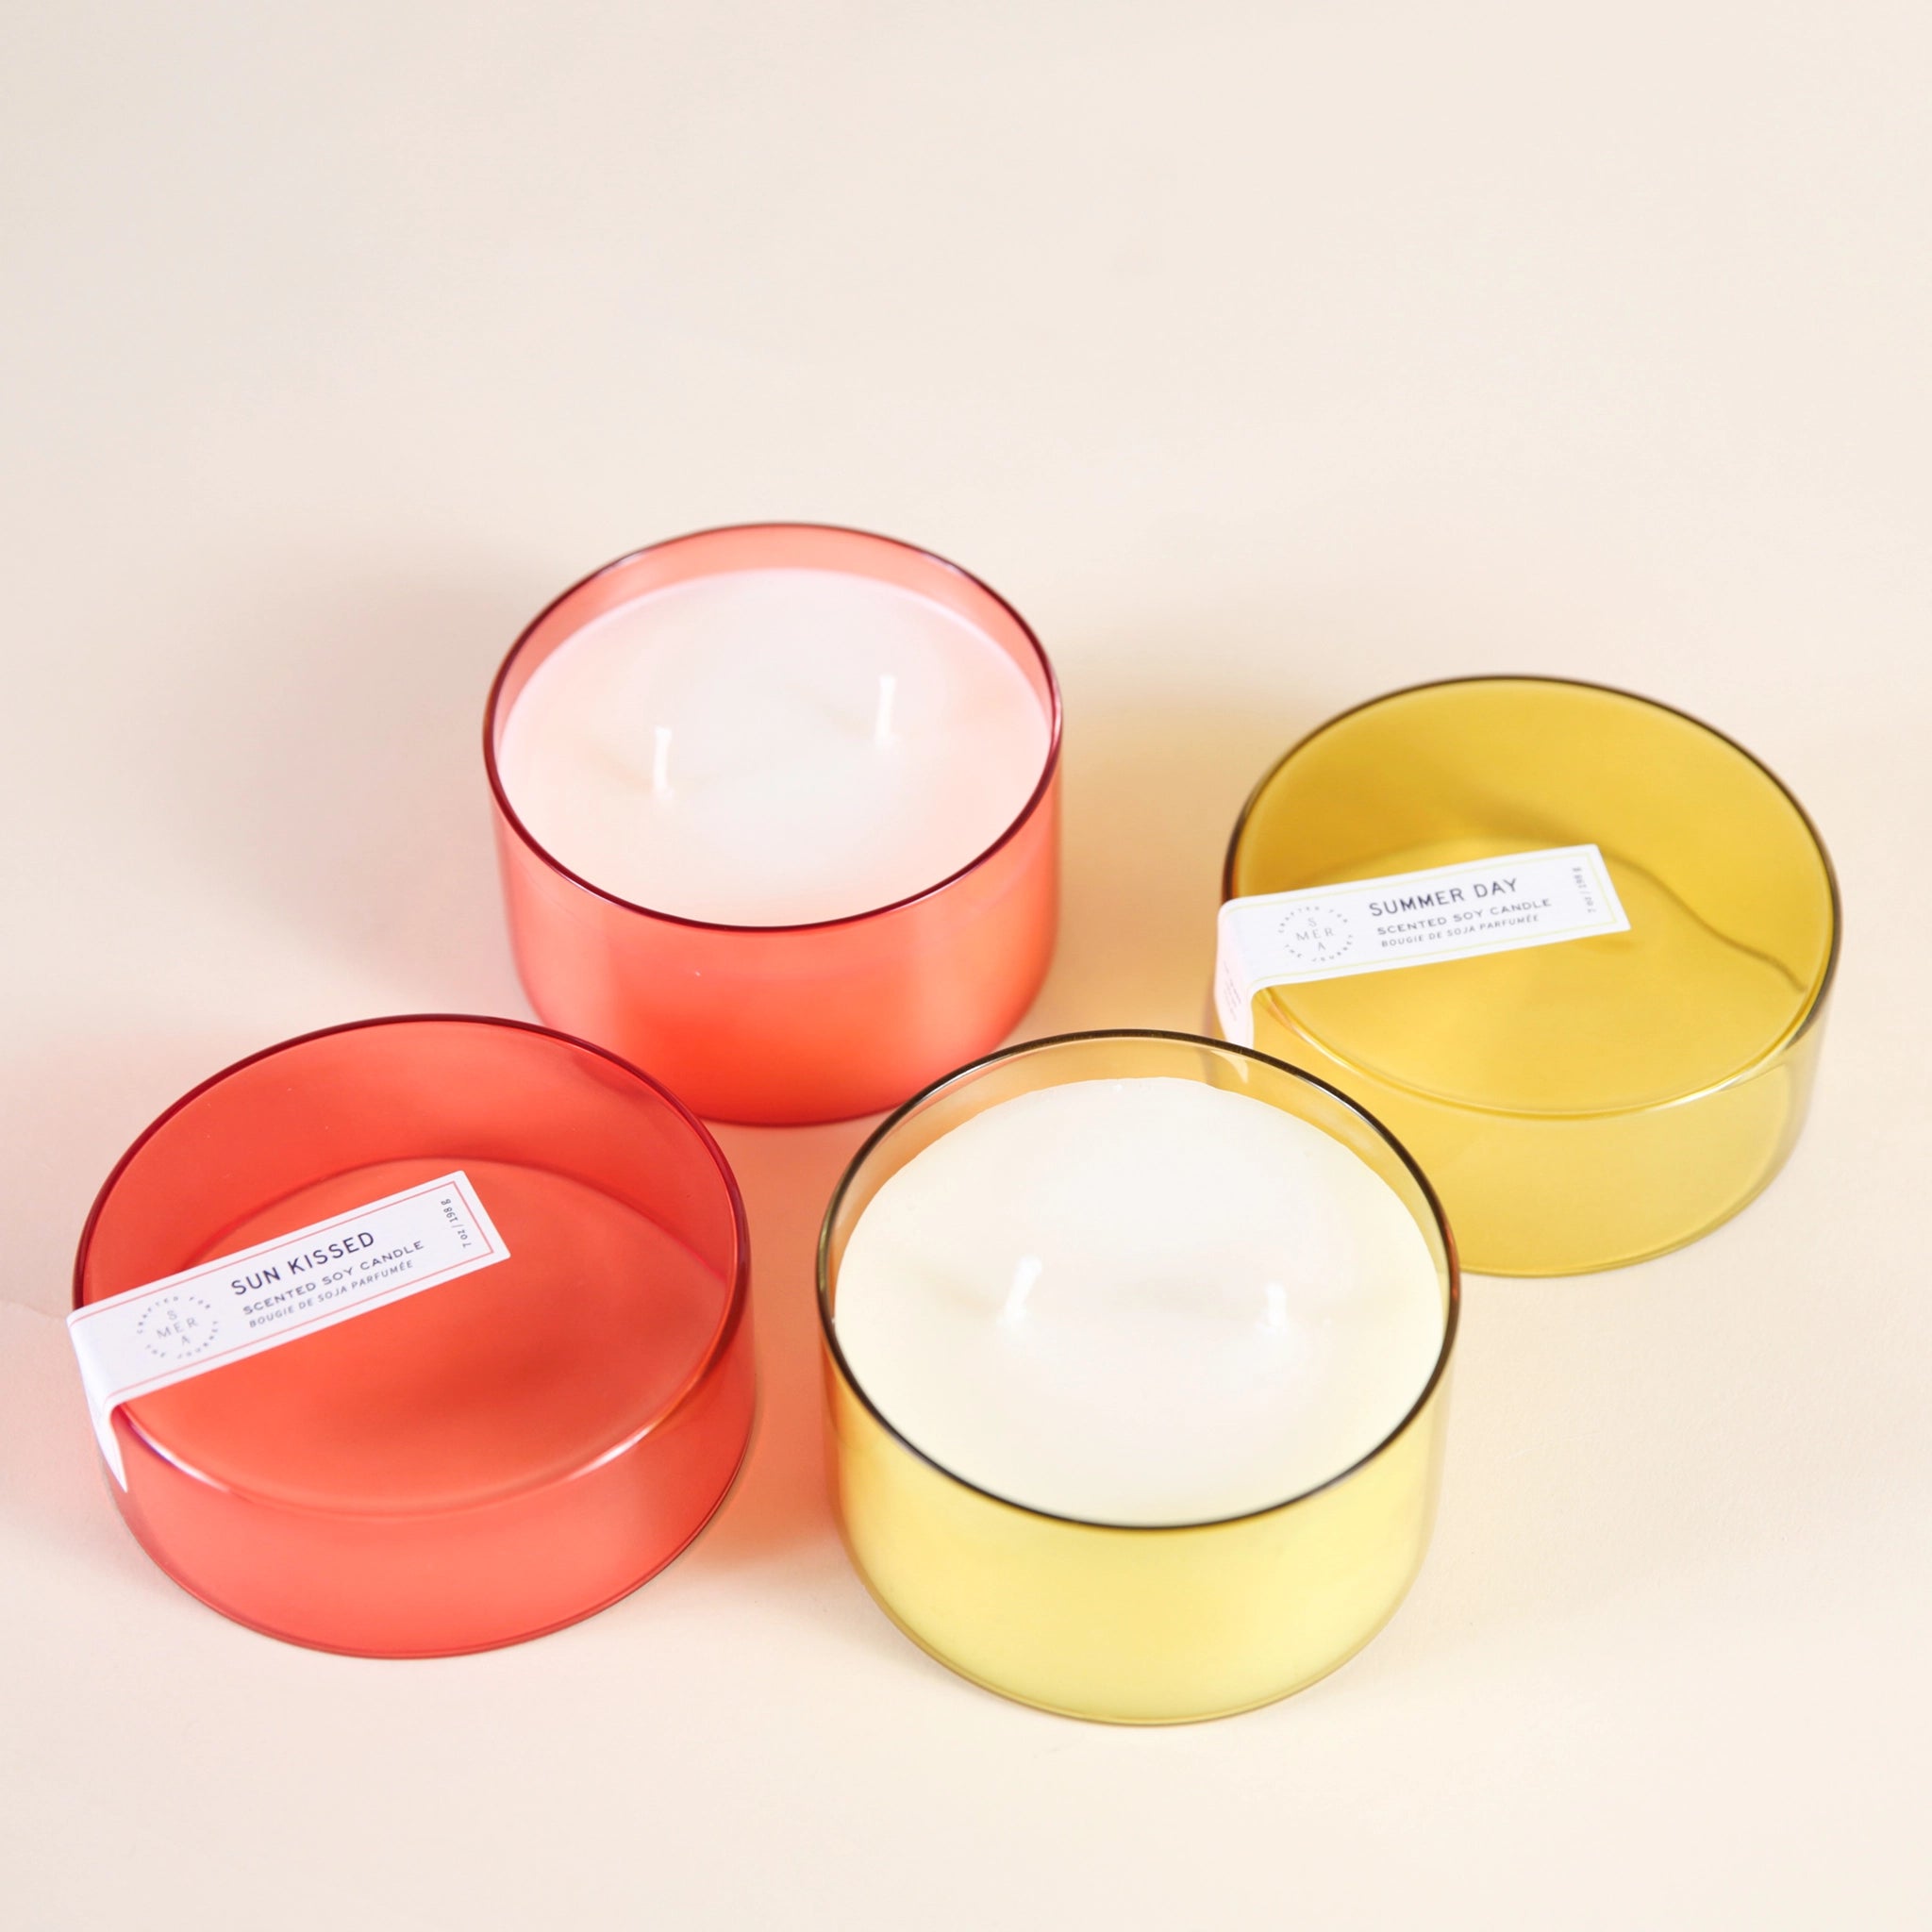 A clear orange/red glass jar candle with white wax and a double wick along with a coordinating glass lid photographed here next to a yellow version of the same candle called Summer Day that is available for purchase on our website as well.